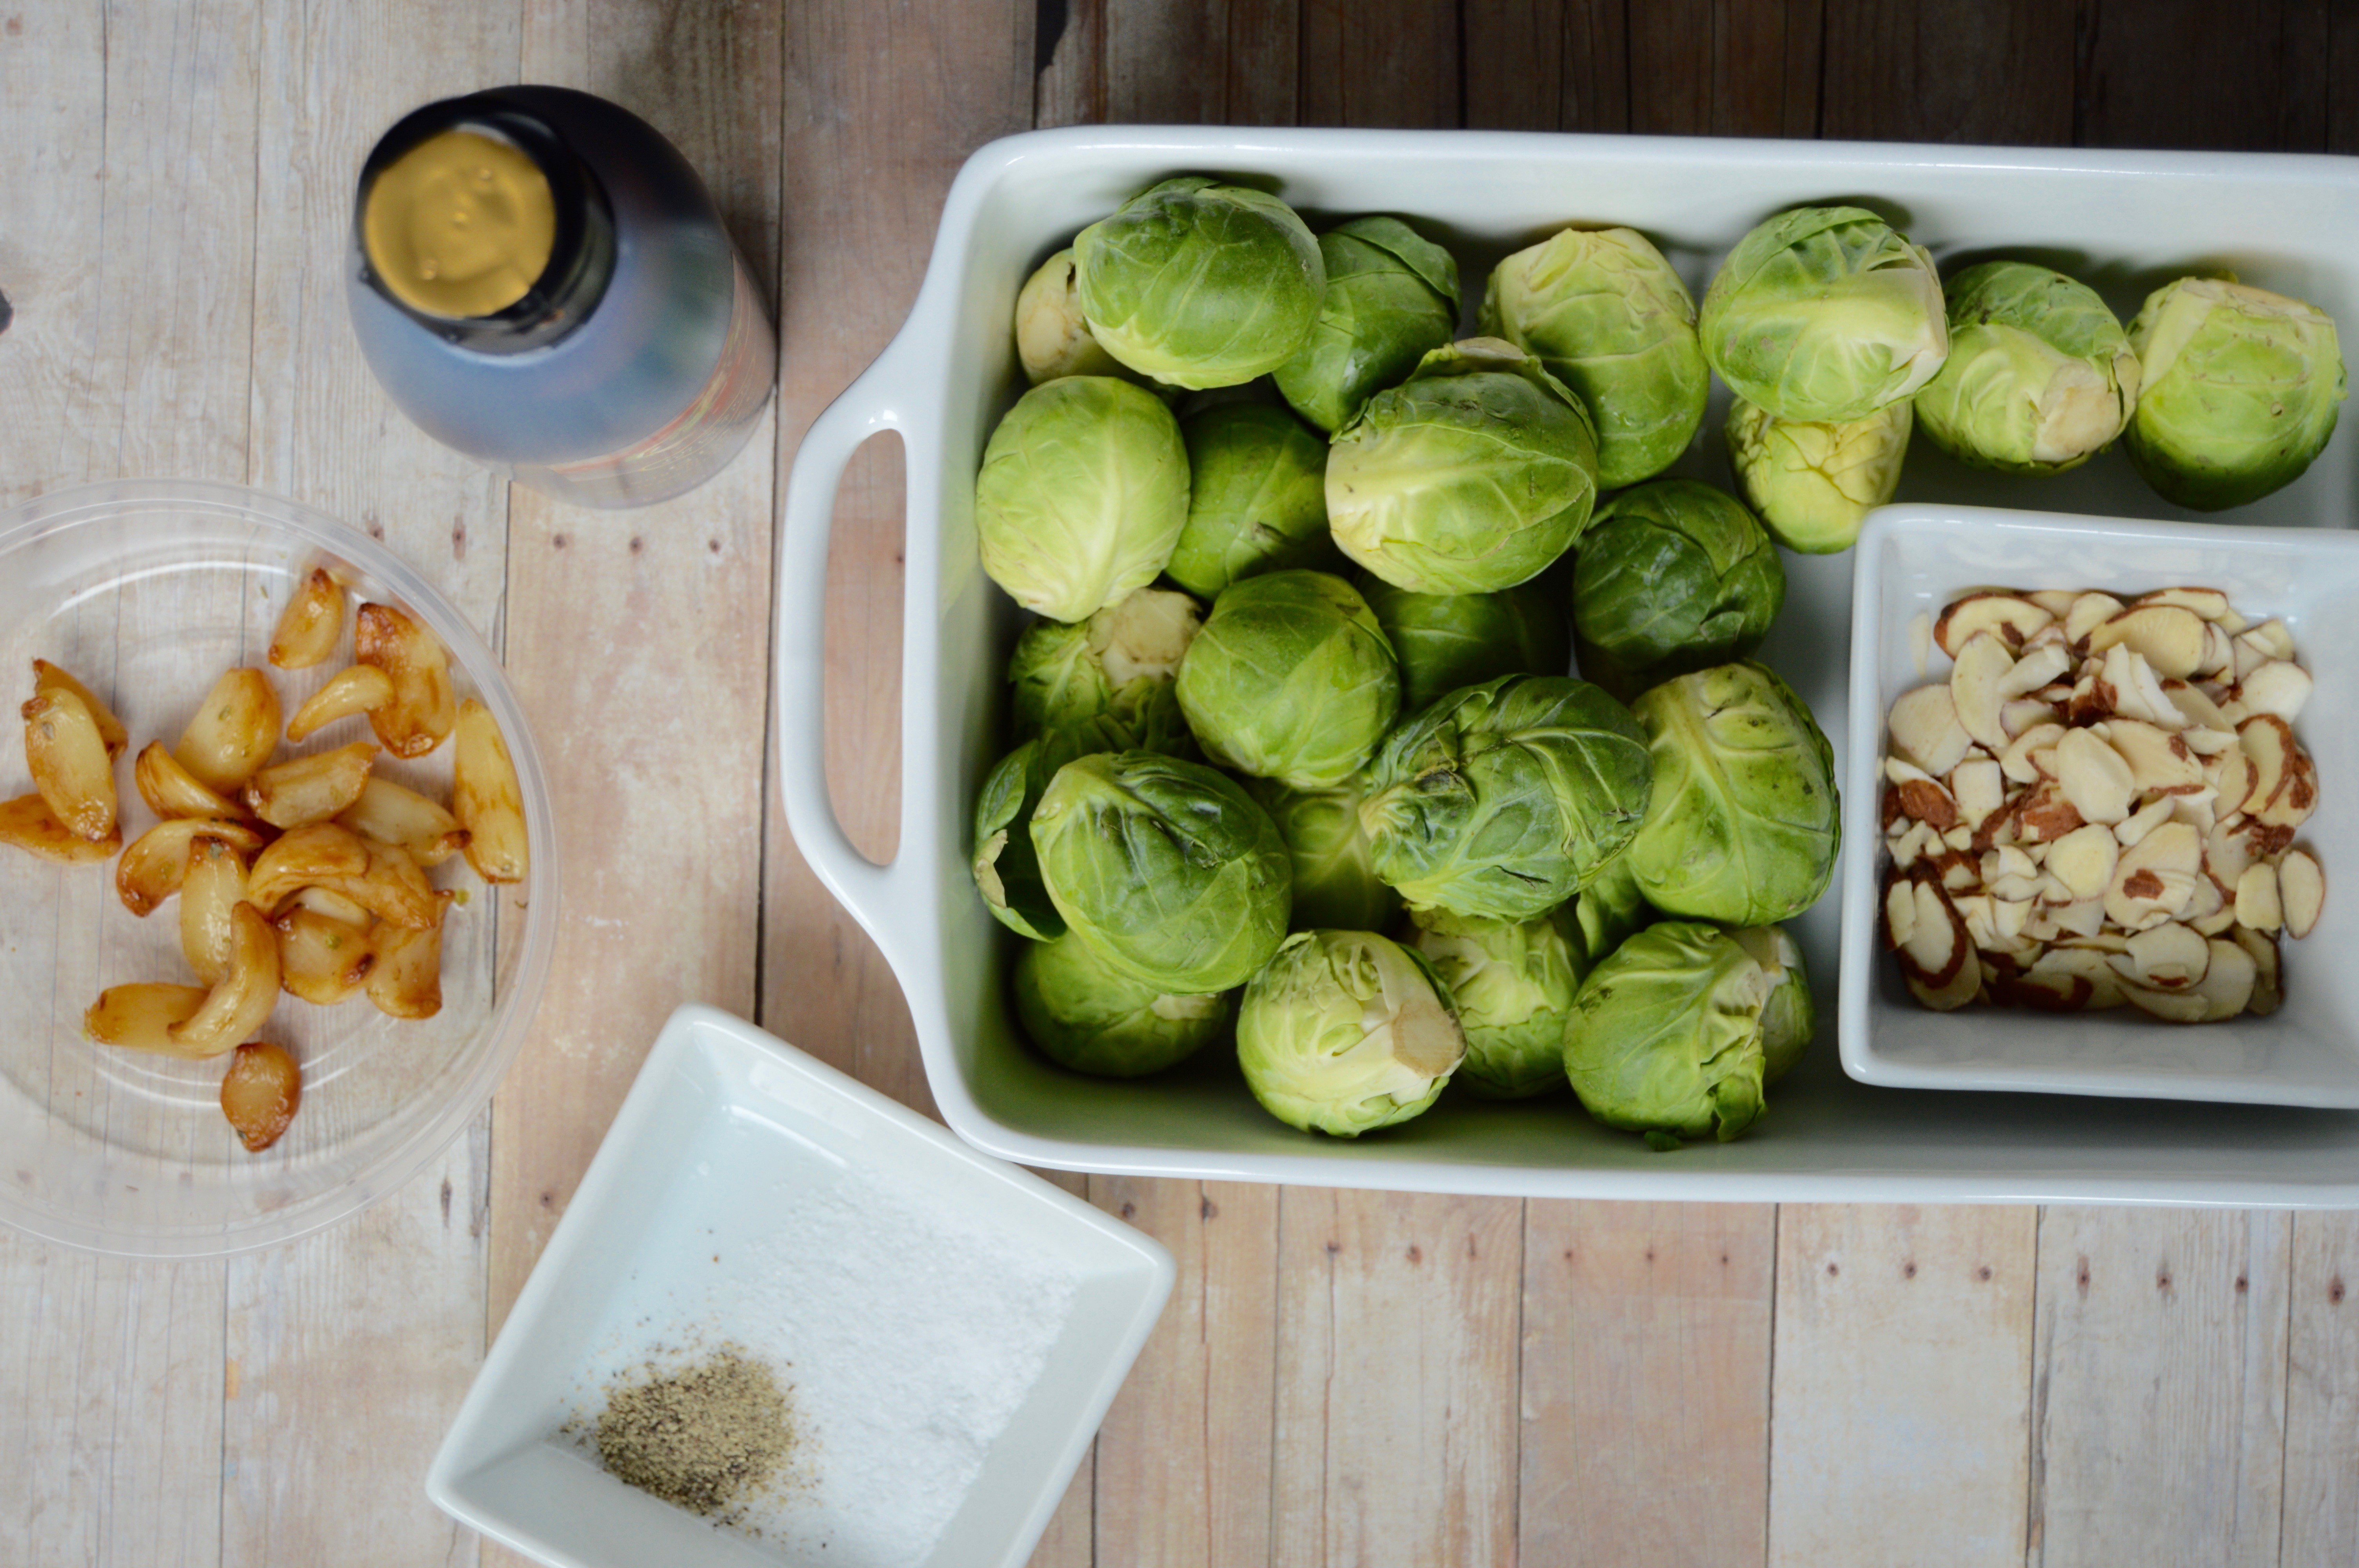 Brussels sprouts recipe for a tasty, savory dish. Healthy vegetable side dish with balsamic vinegar glaze. Ingredients + directions for pan frying.